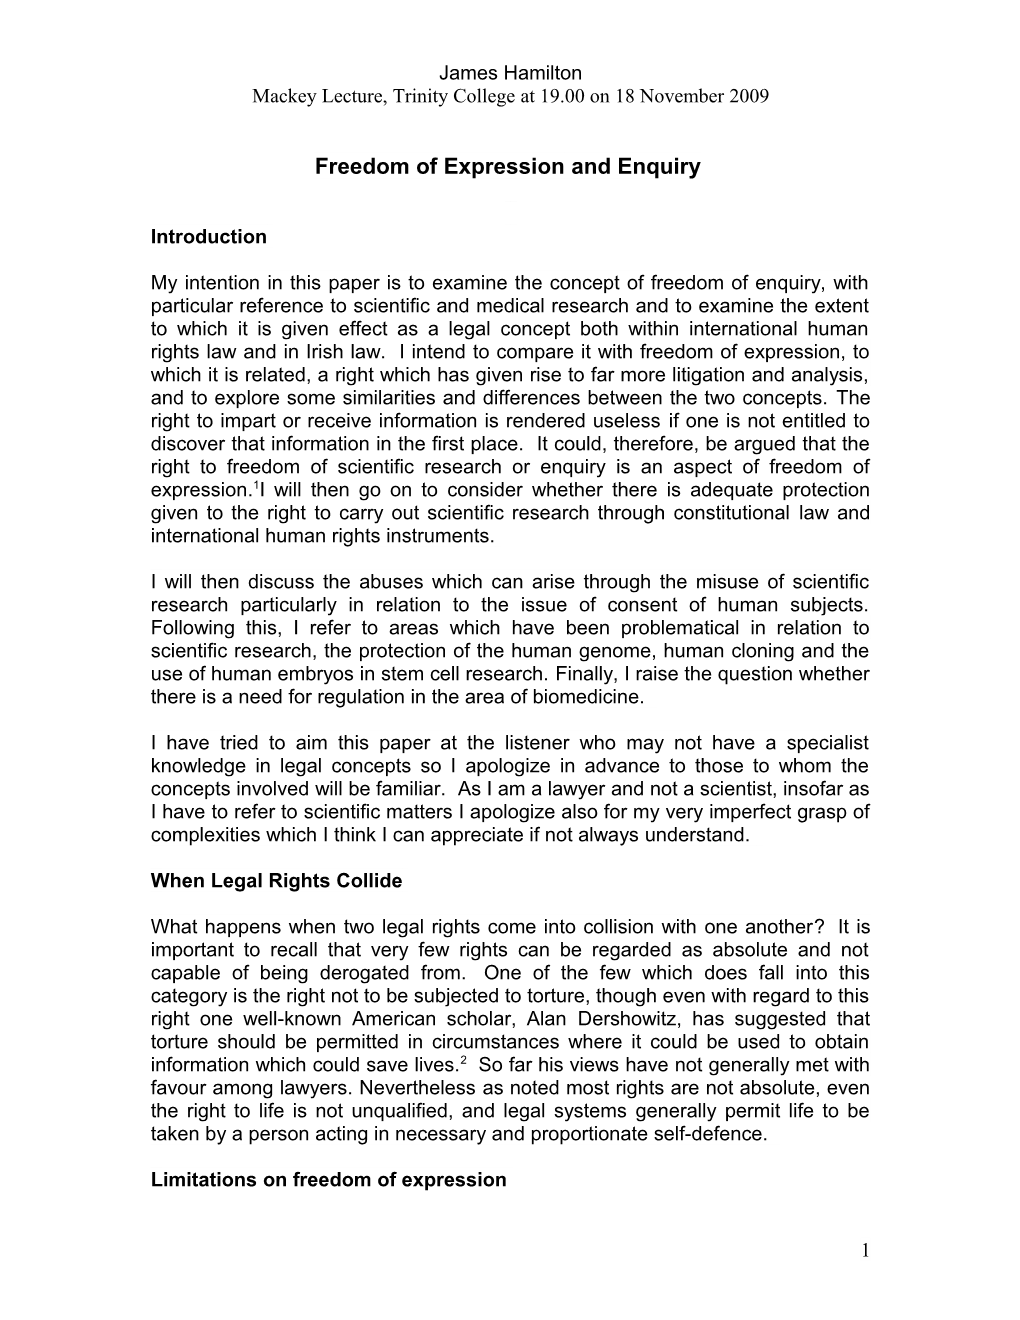 Freedom of Research / Freedom of Enquiry